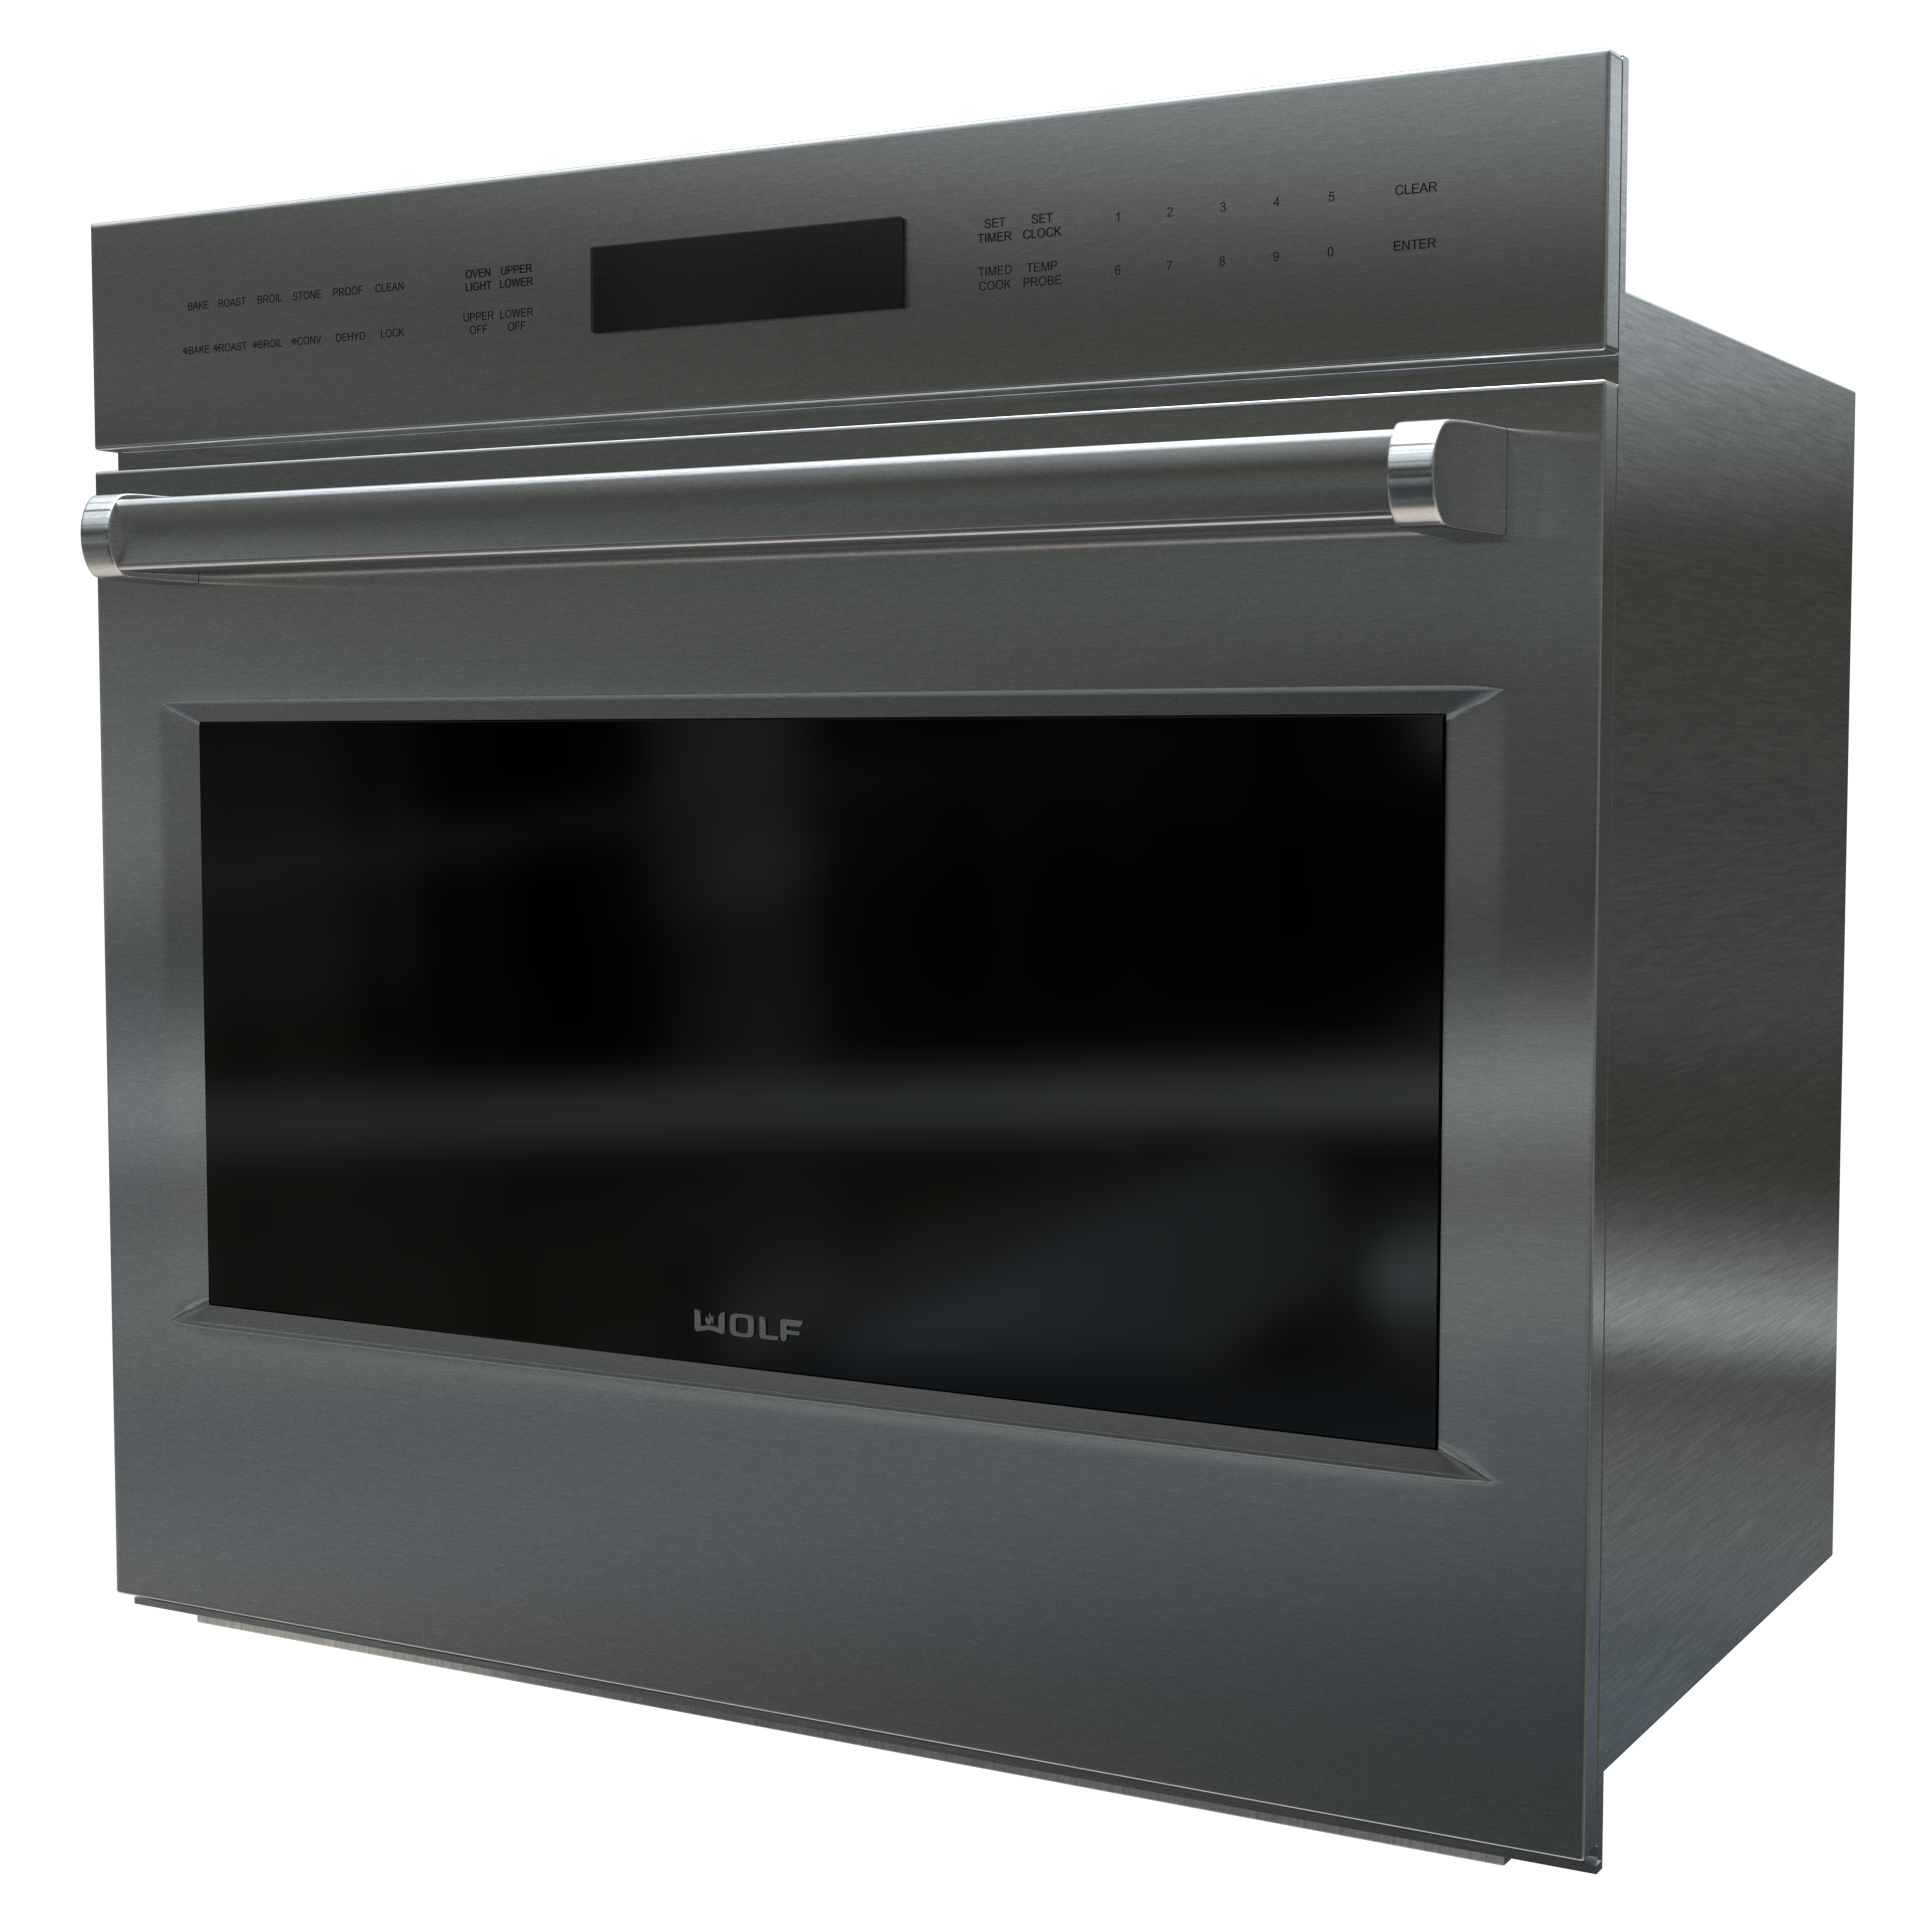 Oven AI 01 Preview.png